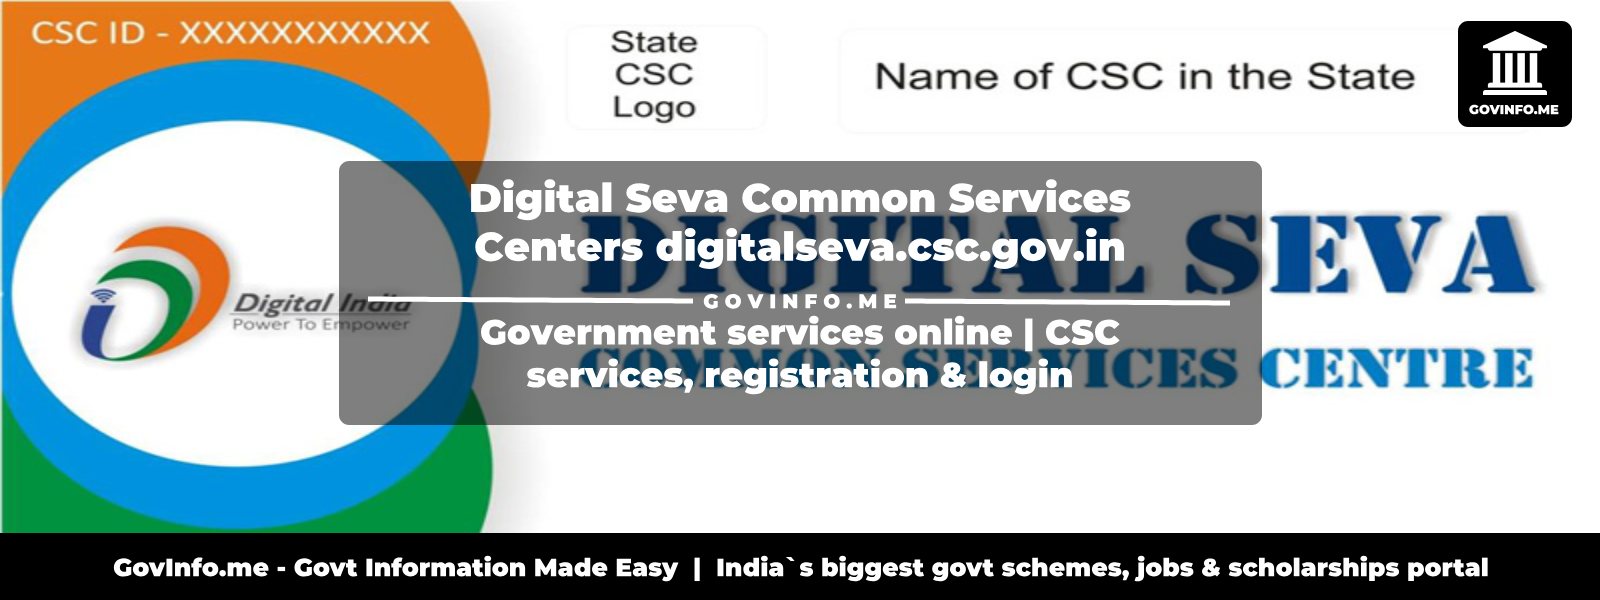 RAJ DIGITAL SEVA KENDRA - Your One-Stop Solution for All Online Services